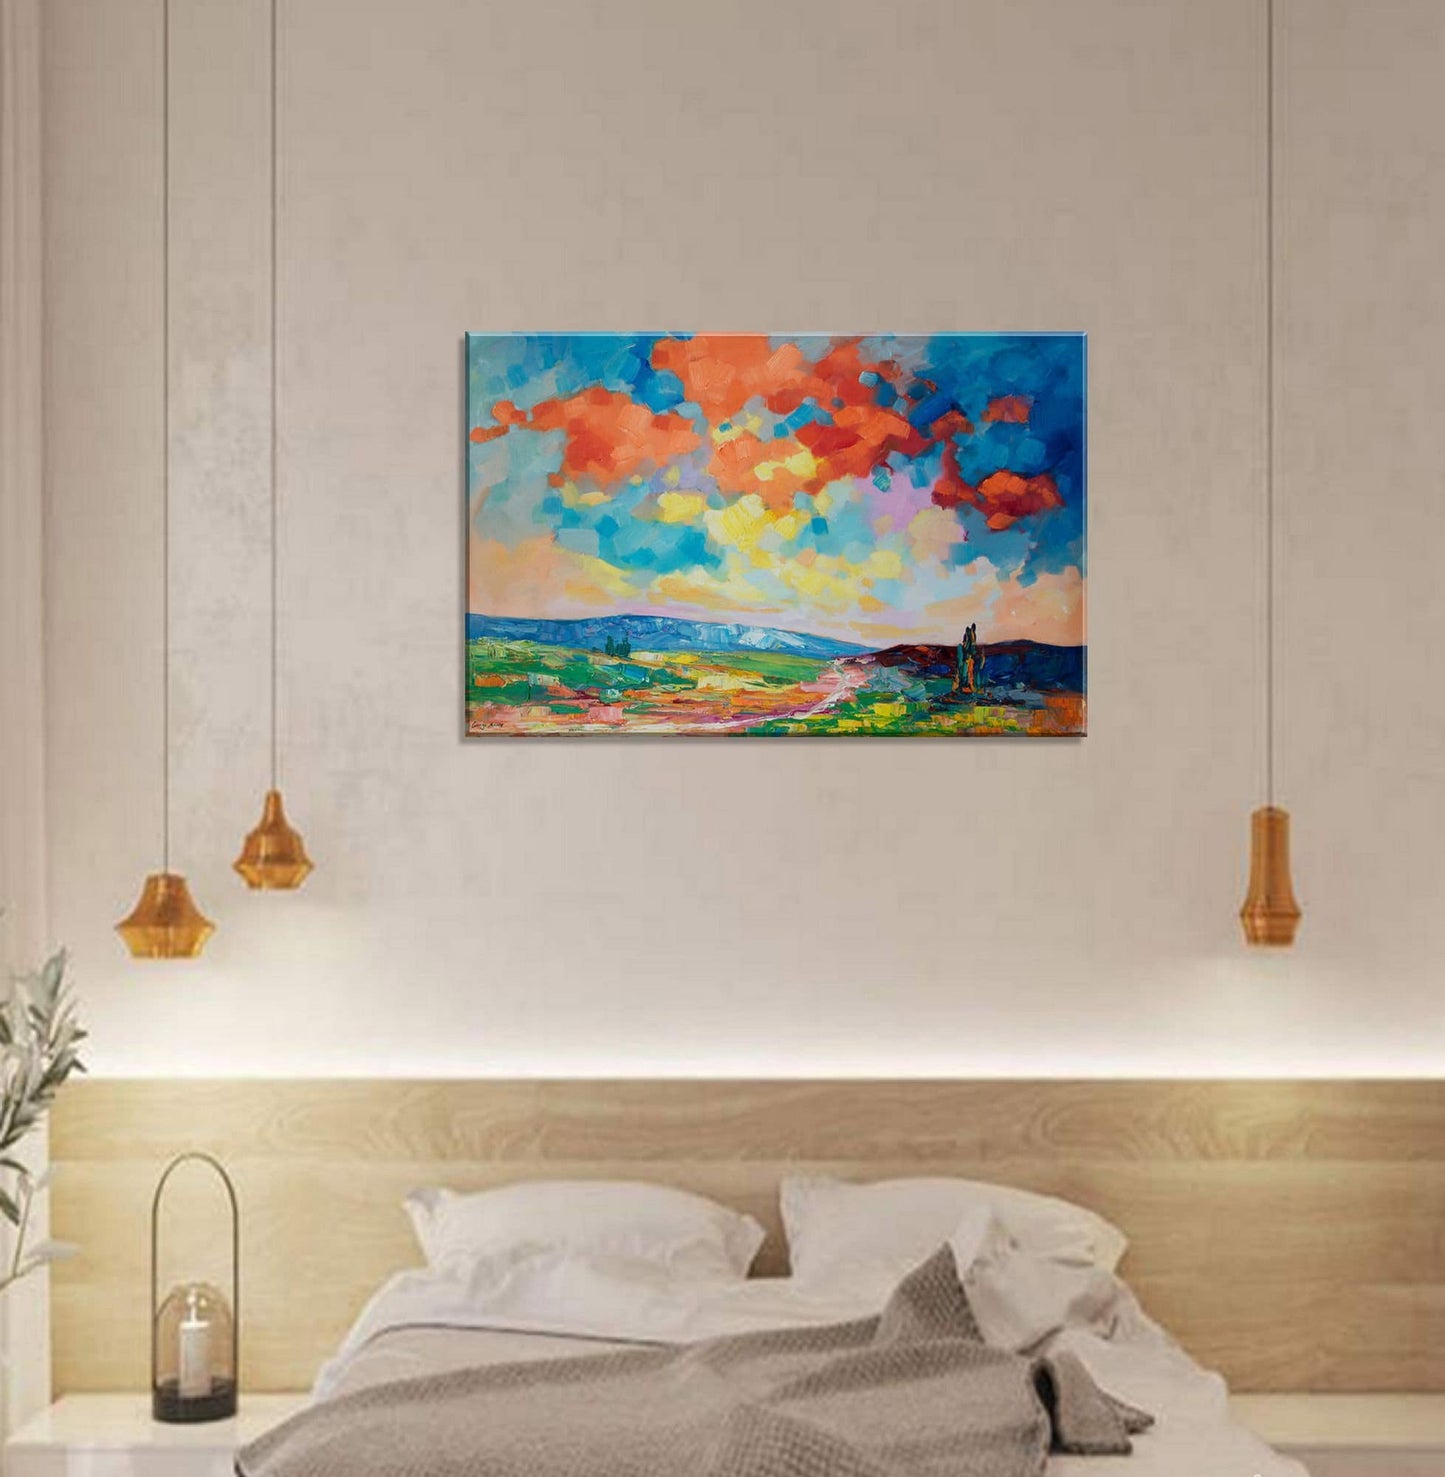 Oil Painting Abstract, Canvas Painting, Modern Art, Large Painting, Landscape Oil Painting, Living Room Wall Decor, Large Wall Art Painting